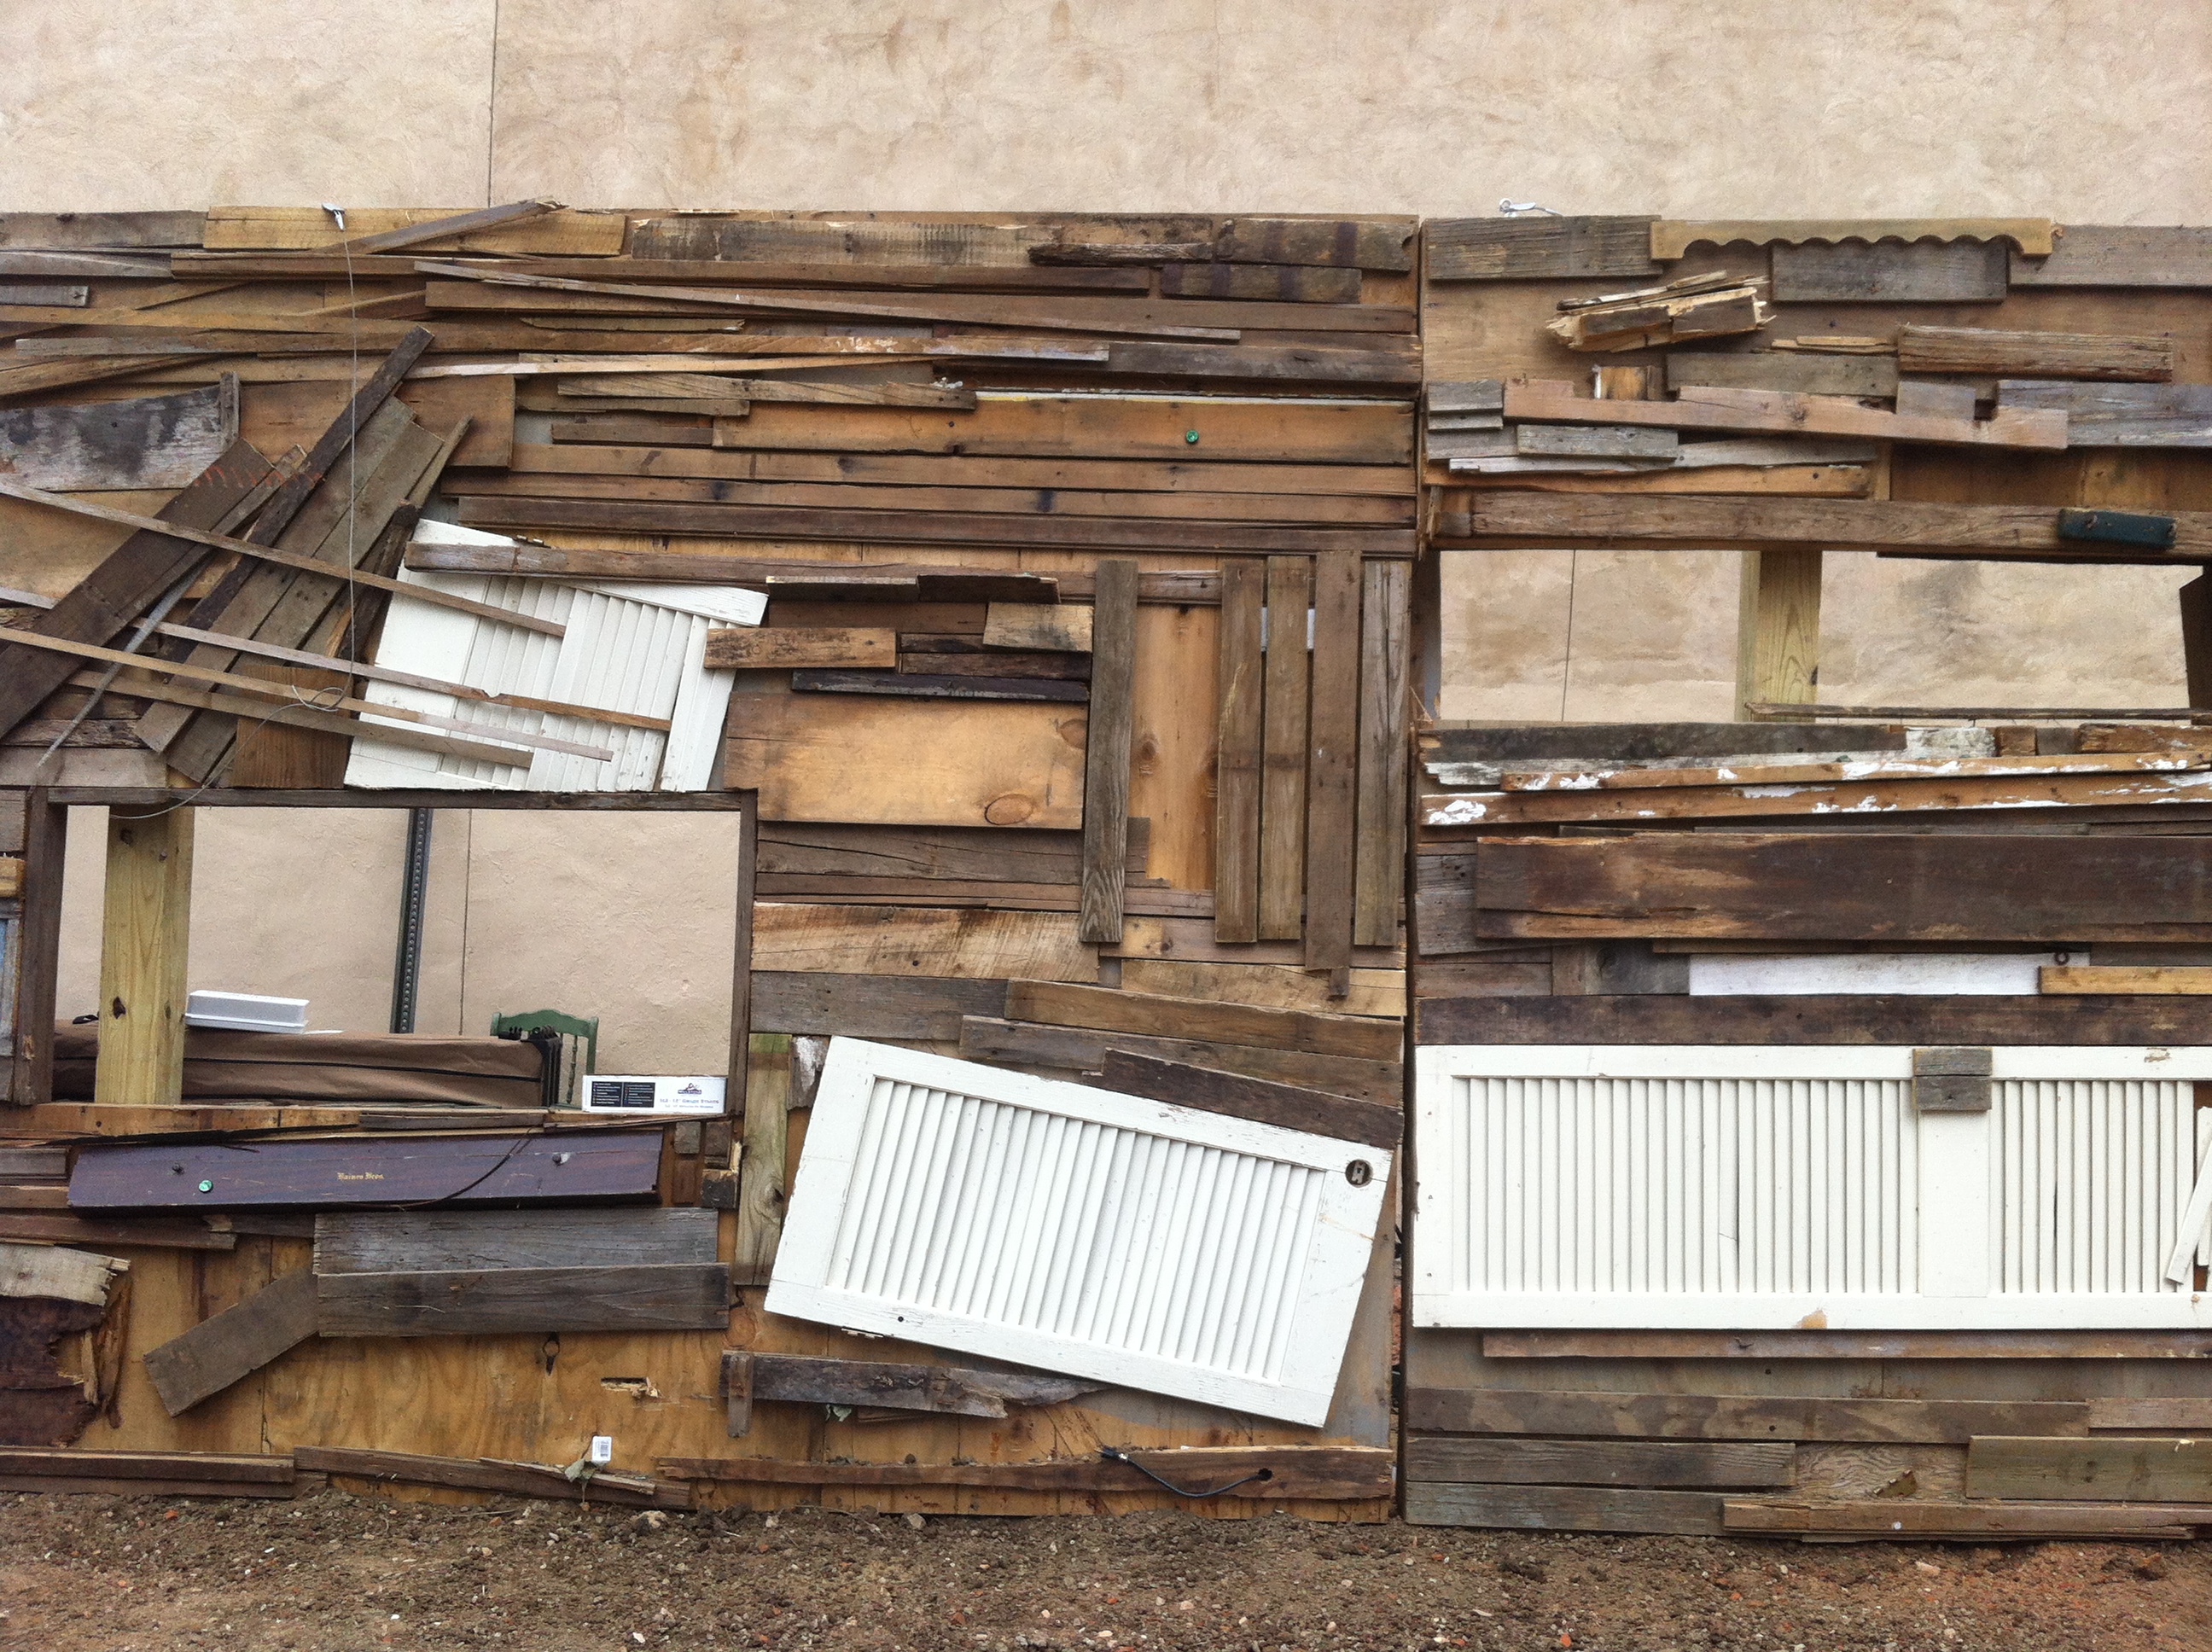 Greco/Wall of recycled wood